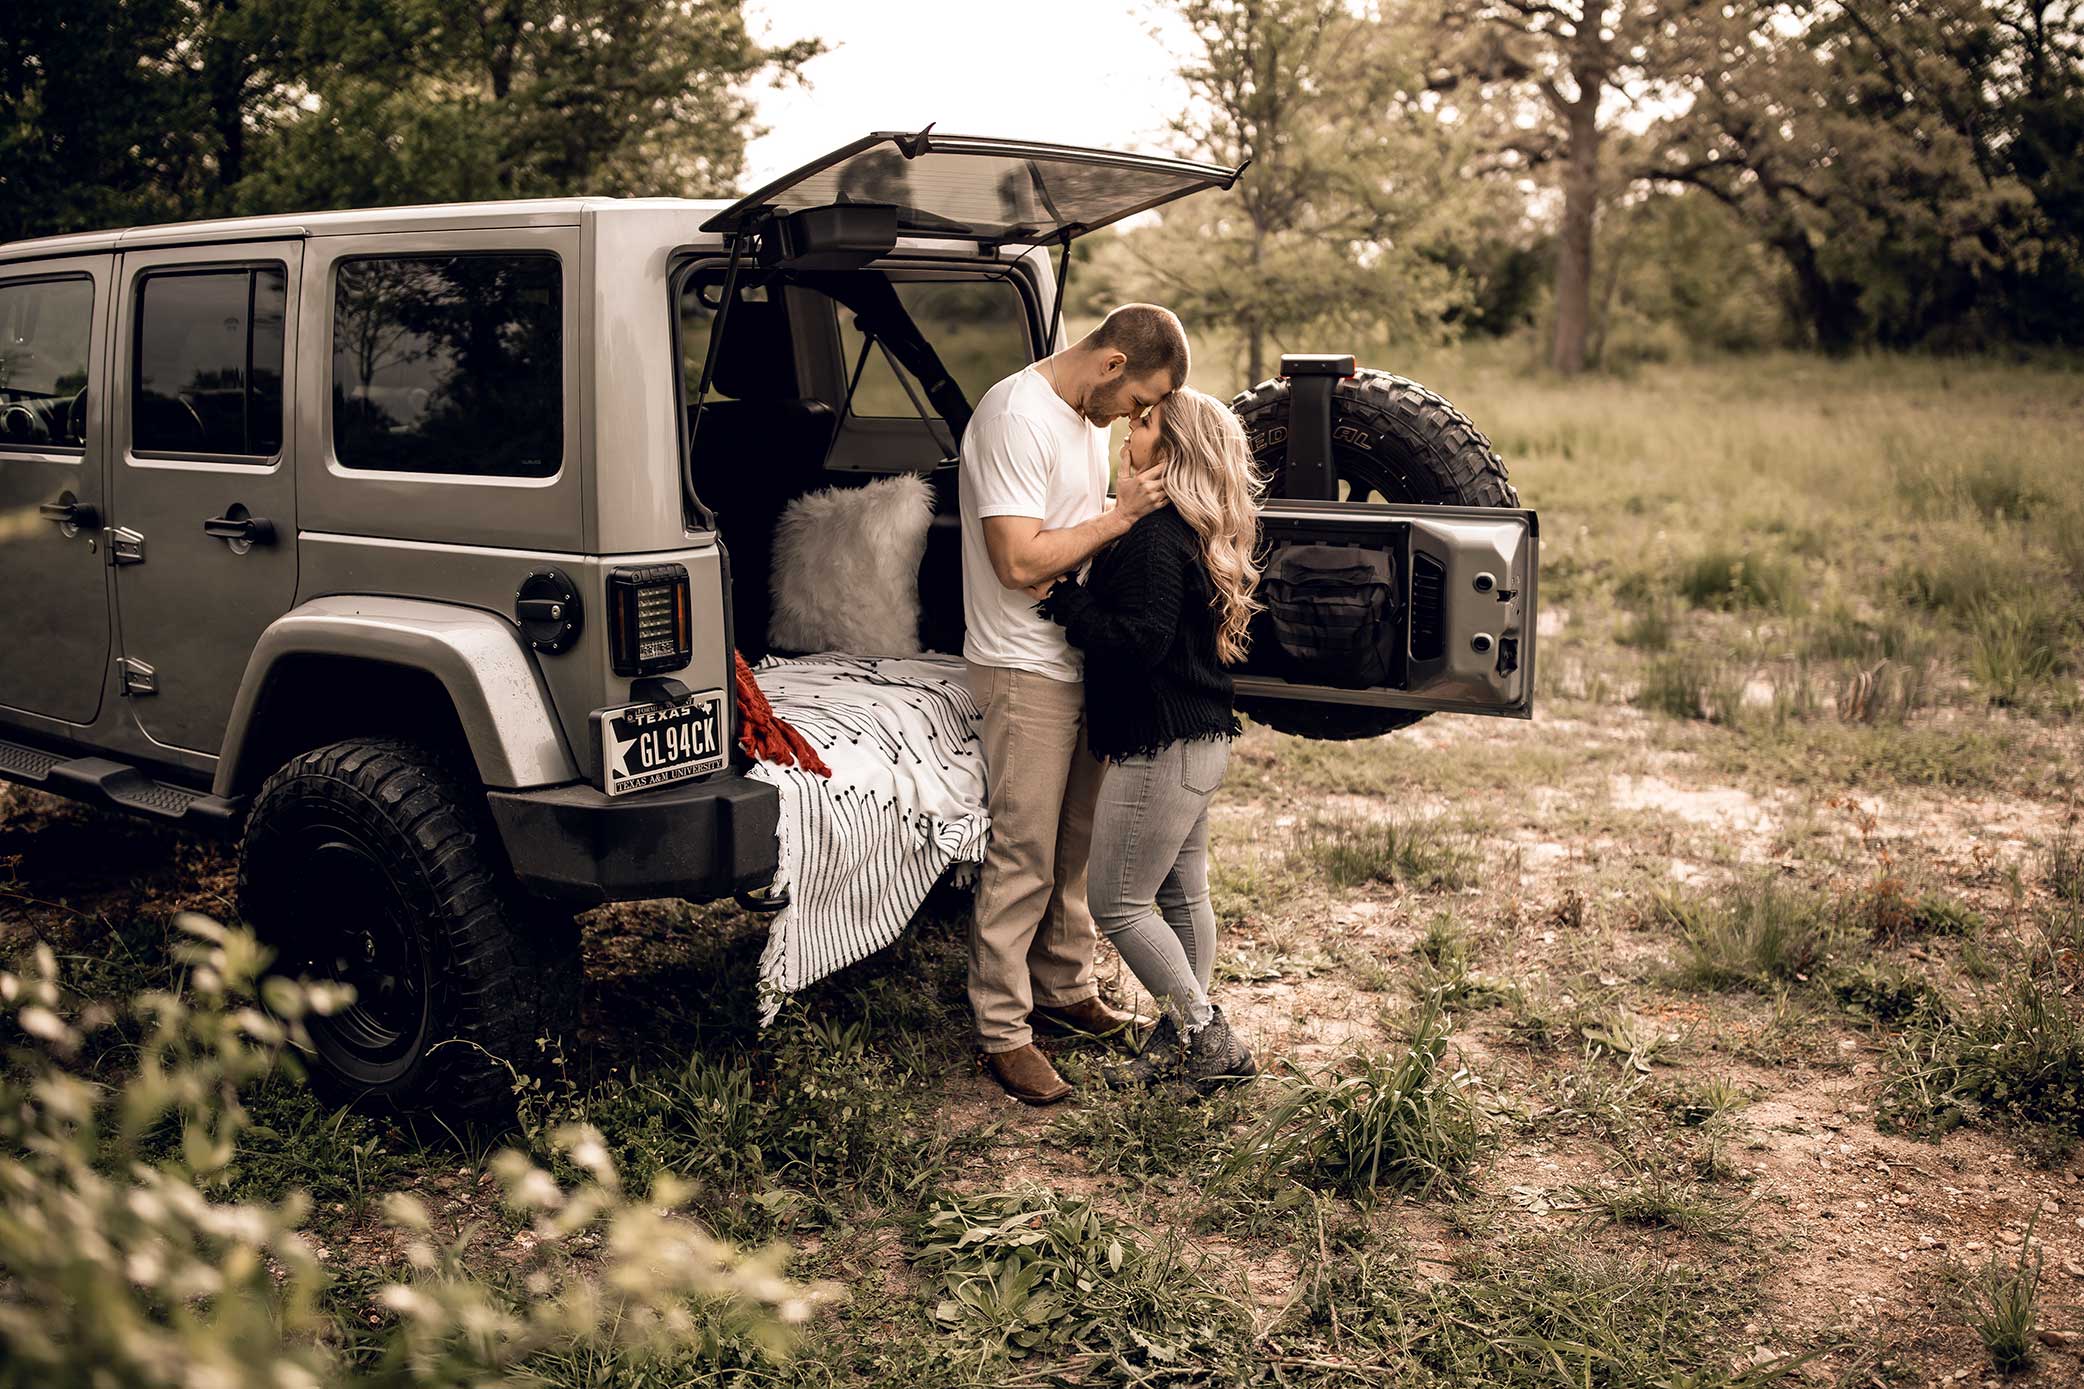 shelby-schiller-photography-lifestyle-couples-remi-colt-outdoor-jeep-adventure-6.jpg